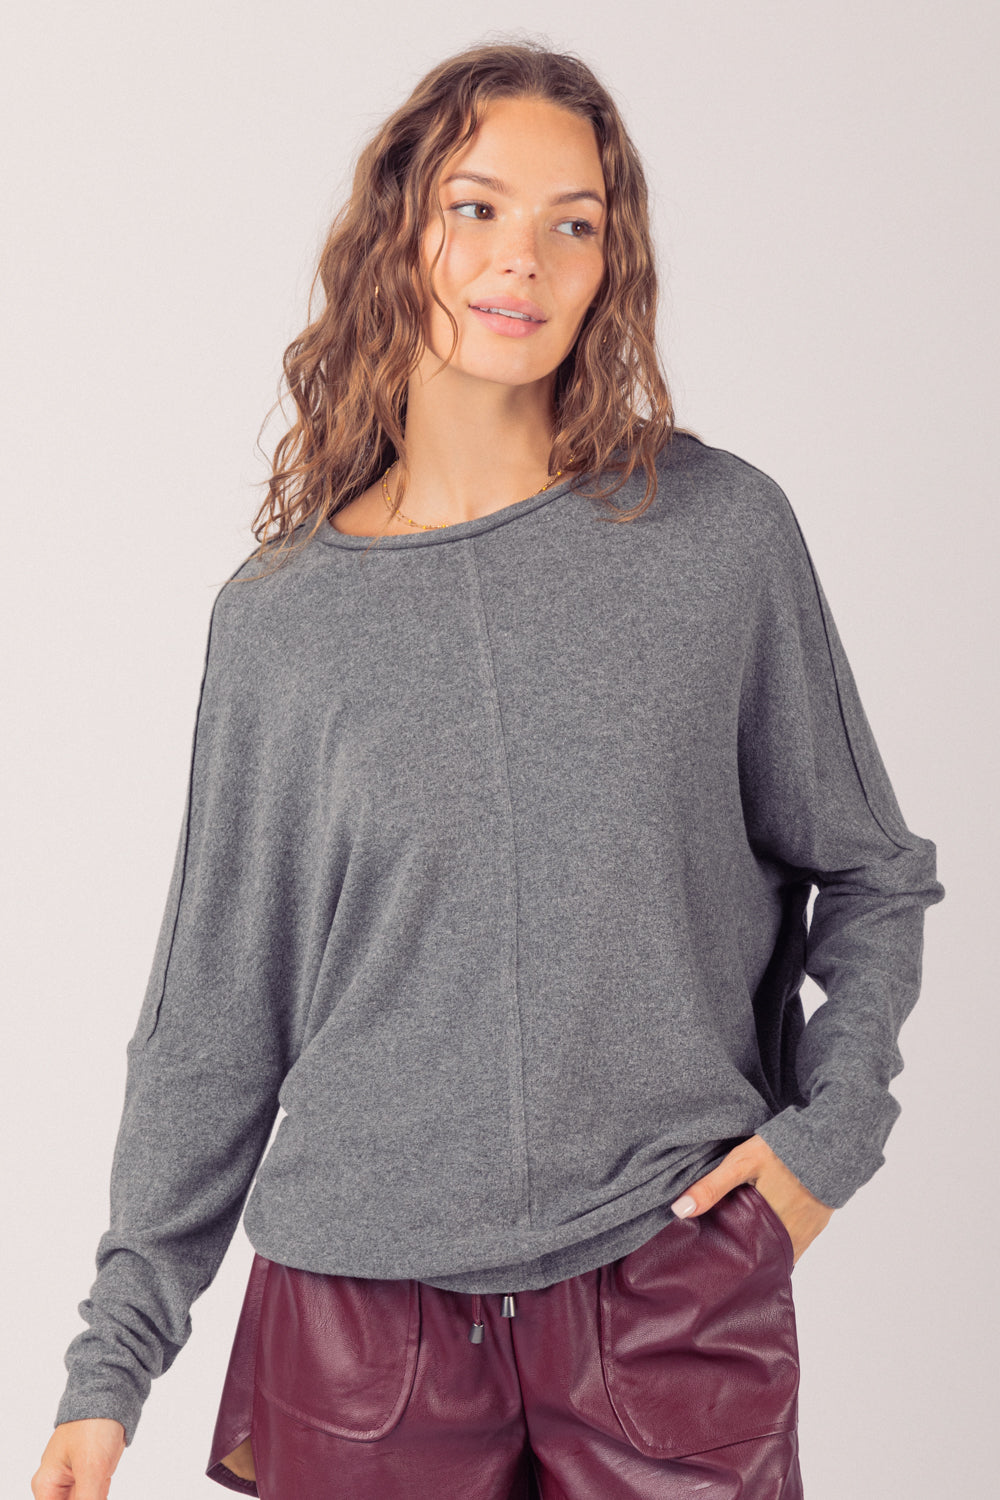 Dolman Sleeve Oversized Comfy Knit Top Available in Curvy Also